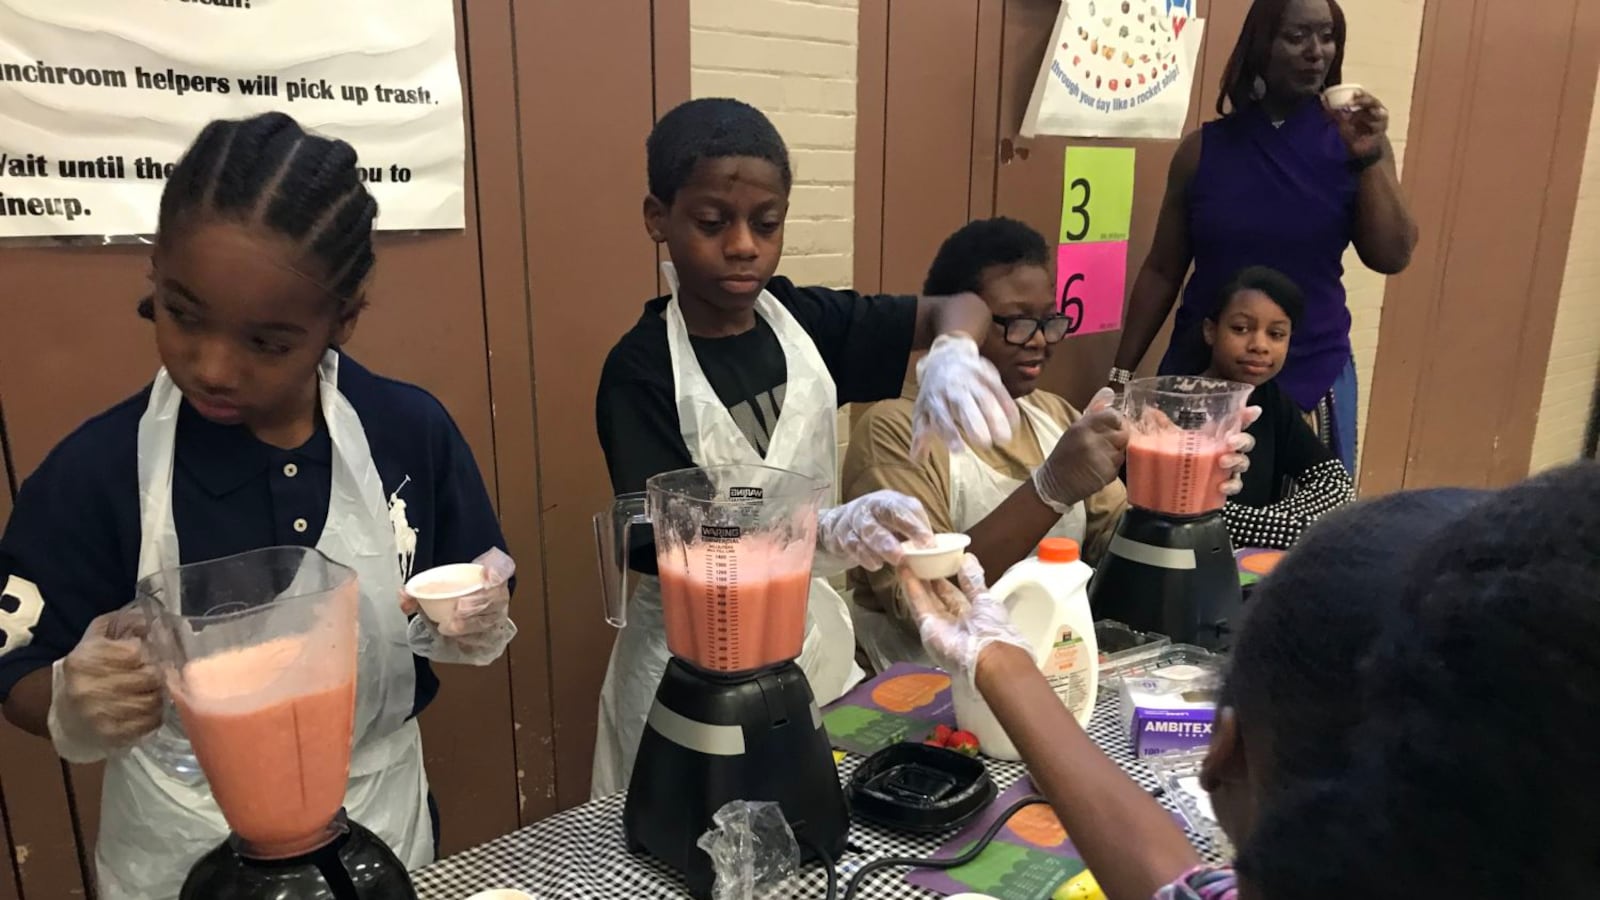 Students at Bethune Elementary-Middle School were treated to smoothies and popcorn on Count Day, courtesy of the Eastern Market and the district's office of school nutrition. The school also raffled prizes including a special lunch with the school's principal.